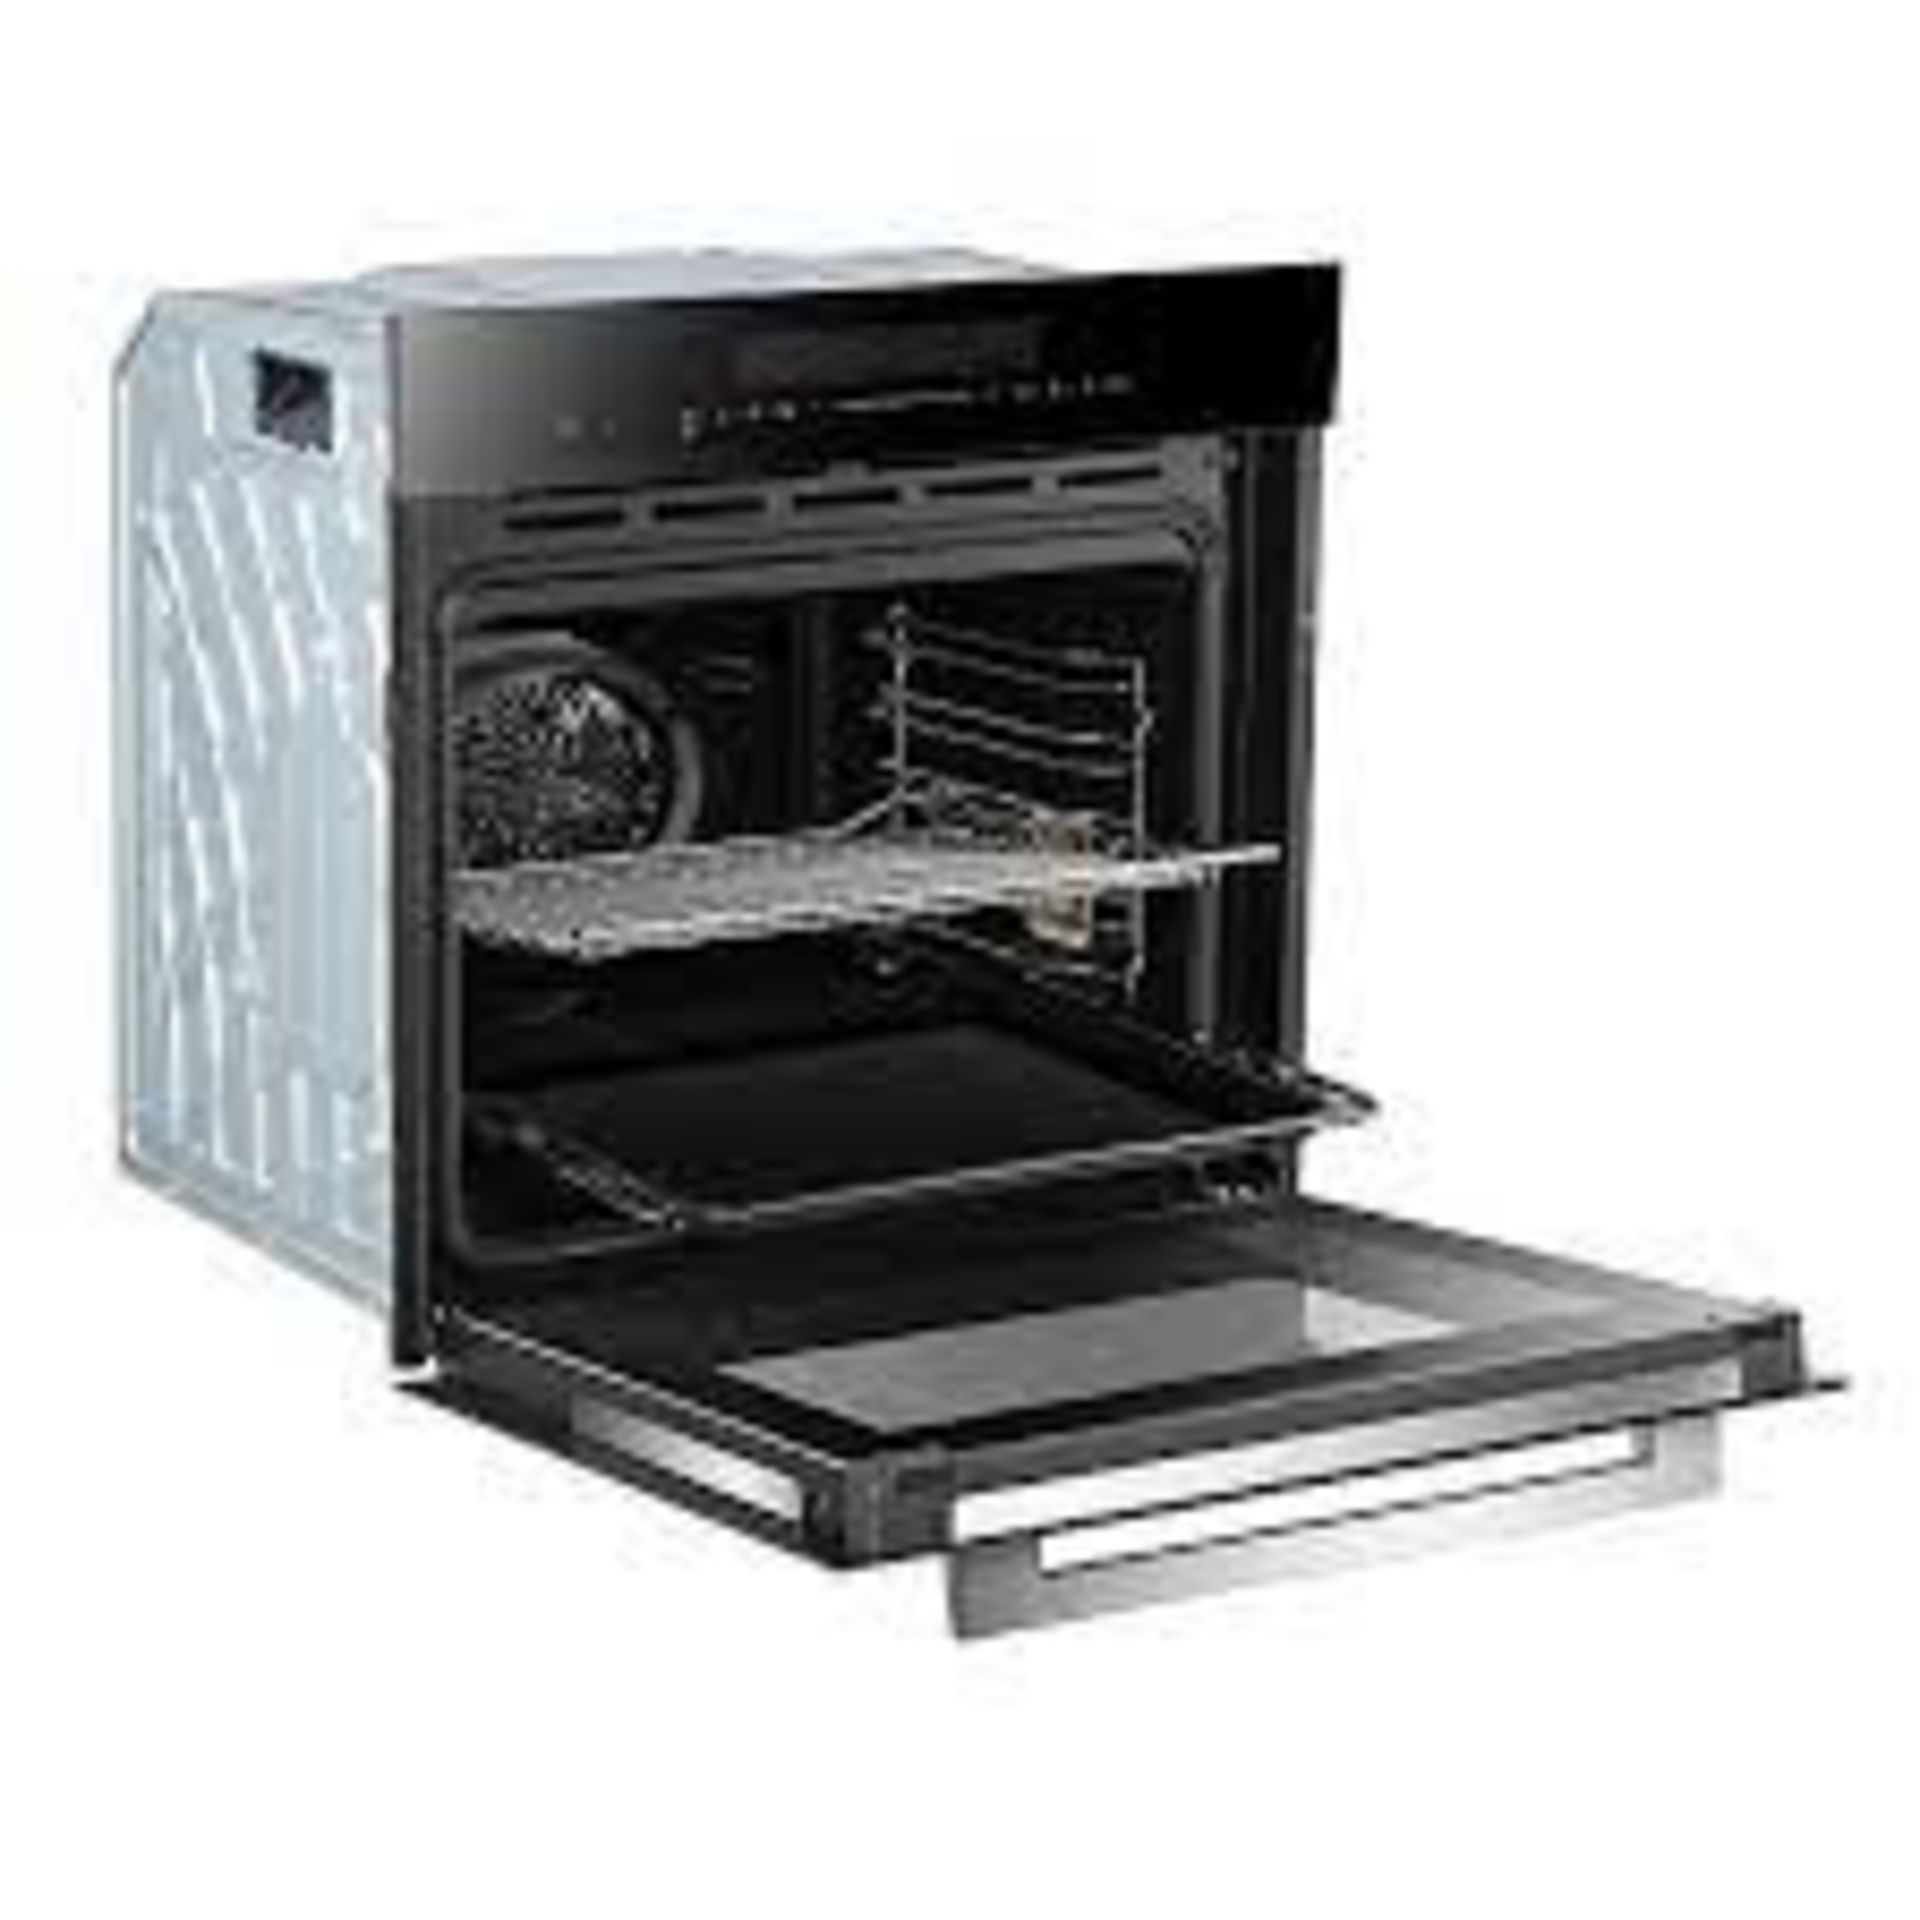 GoodHome GHMOVTC72 Built-in Single Multifunction Oven - Gloss black. - ER44. RRP £426.00. Our - Image 2 of 2